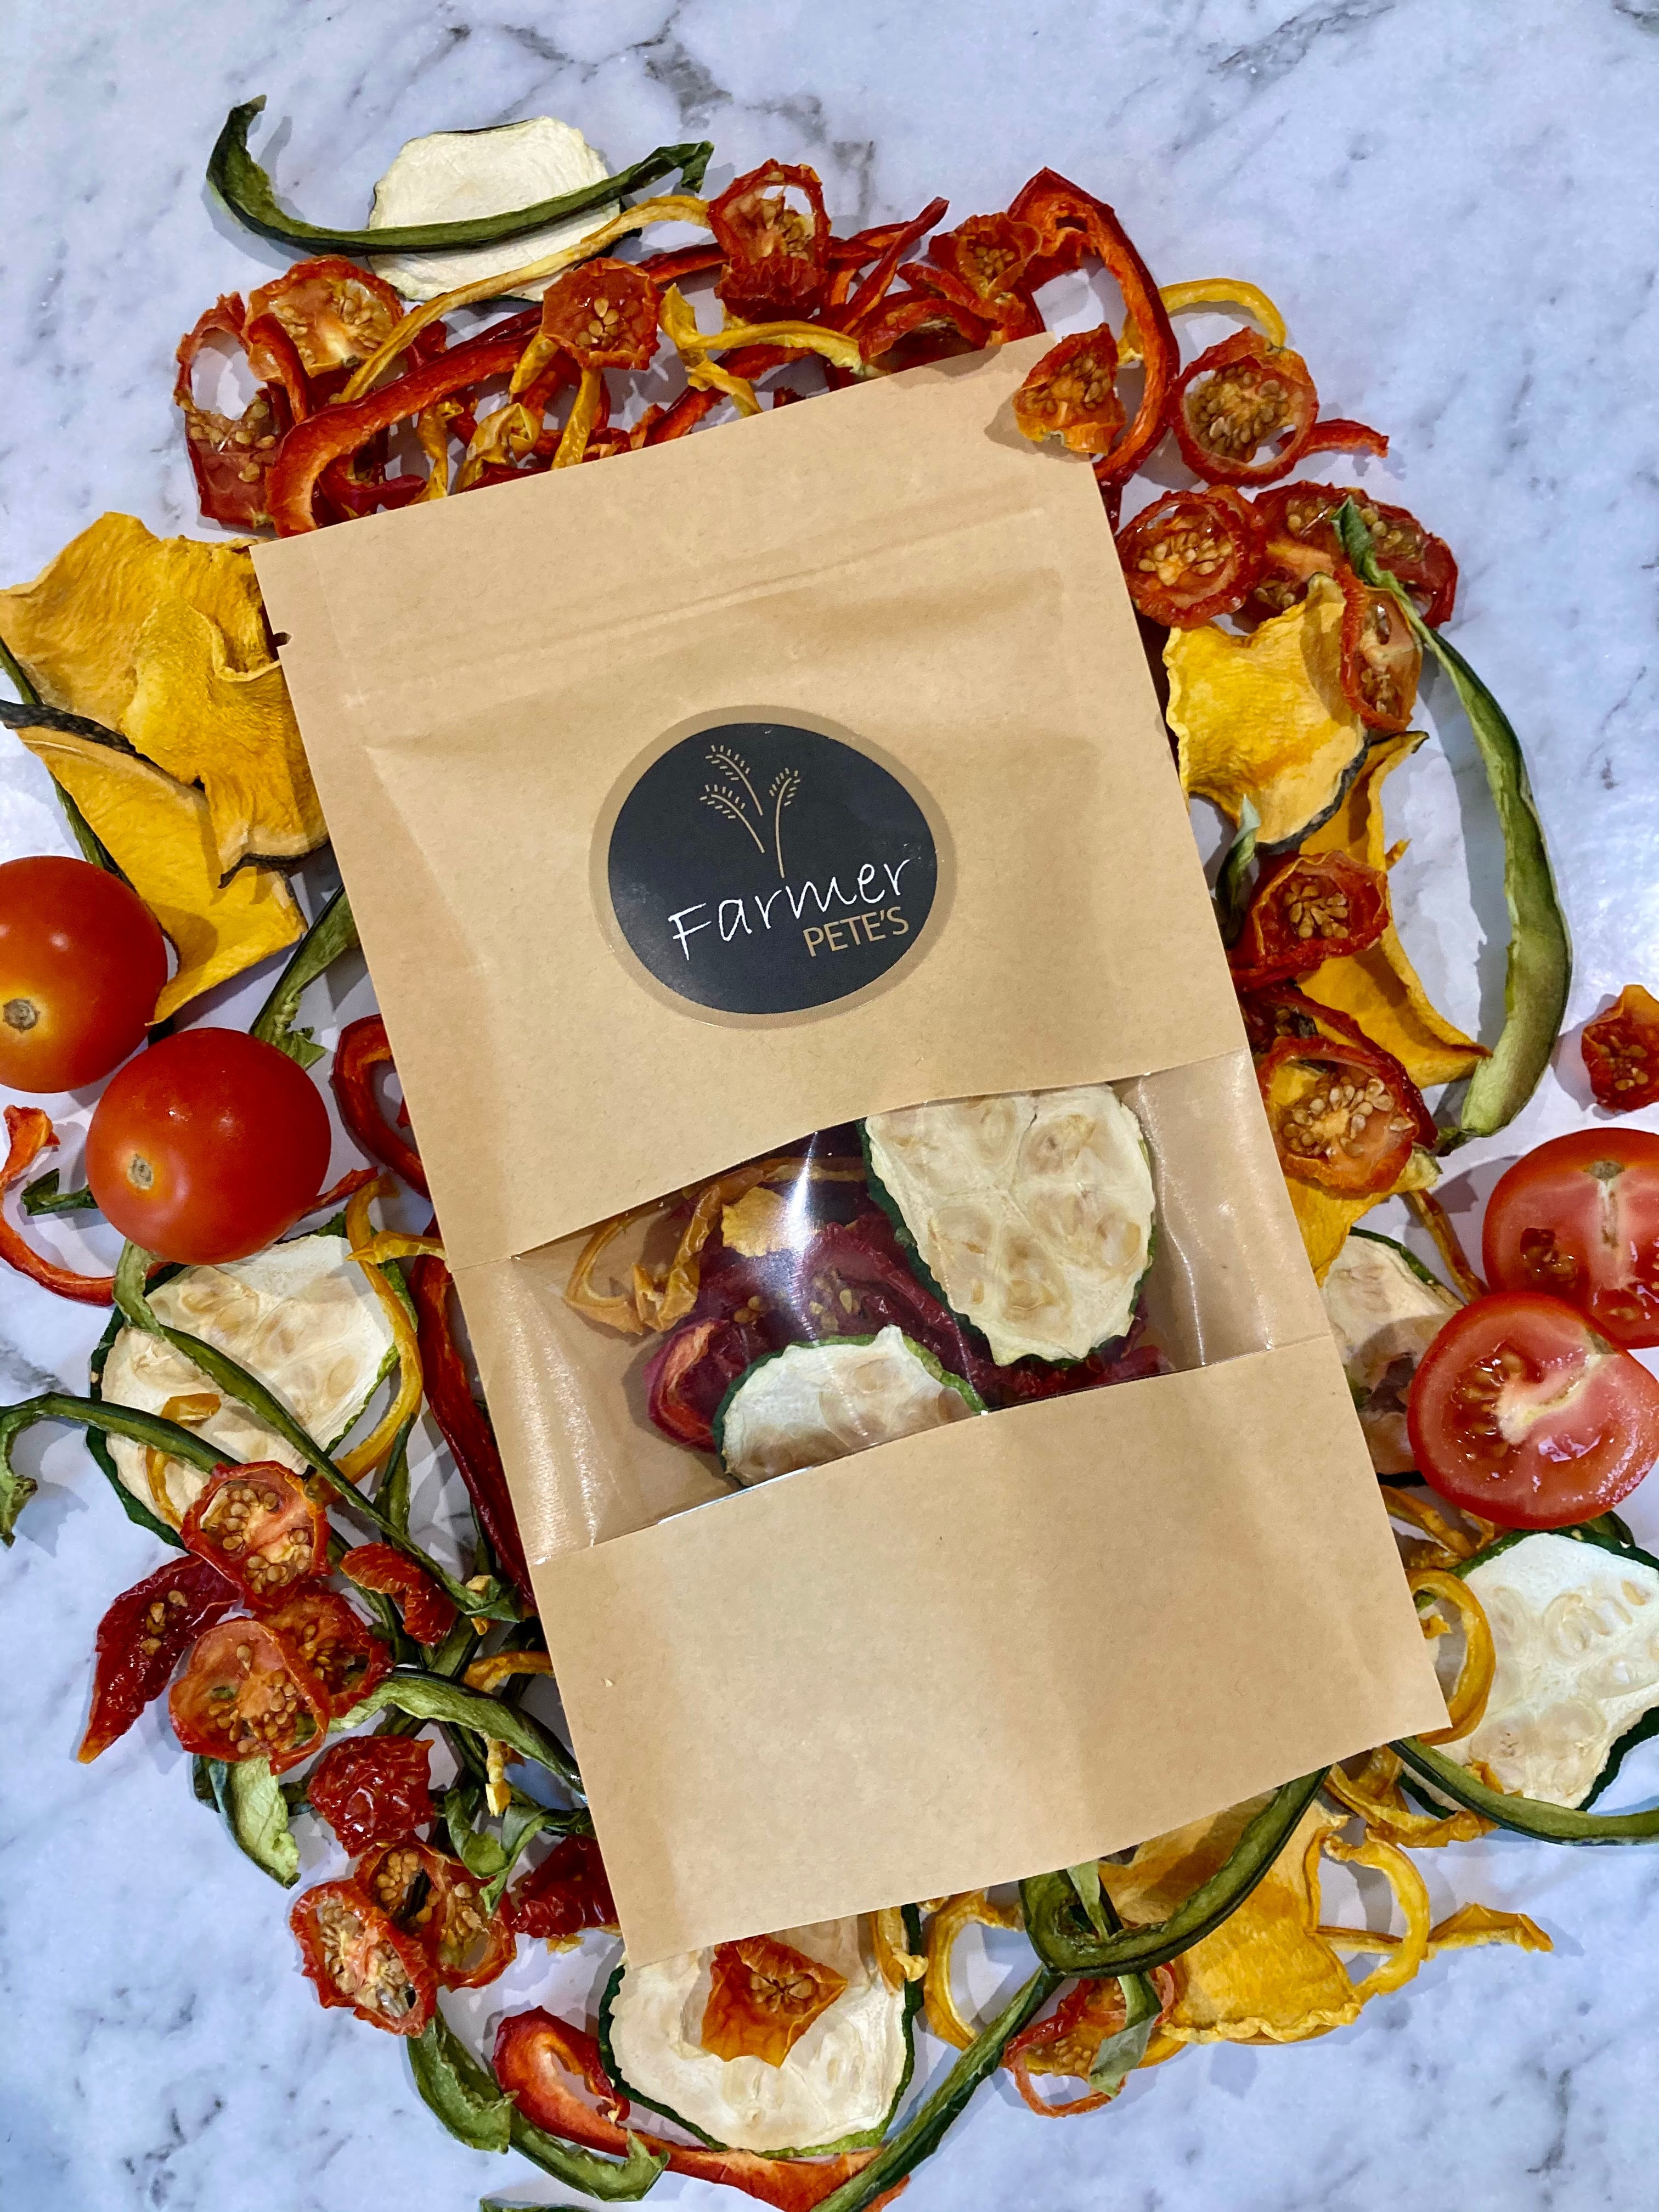 Dried Fruit & Vegetable Treats for Rabbit and Guinea Pigs, made in Australia by Farmer Pete's